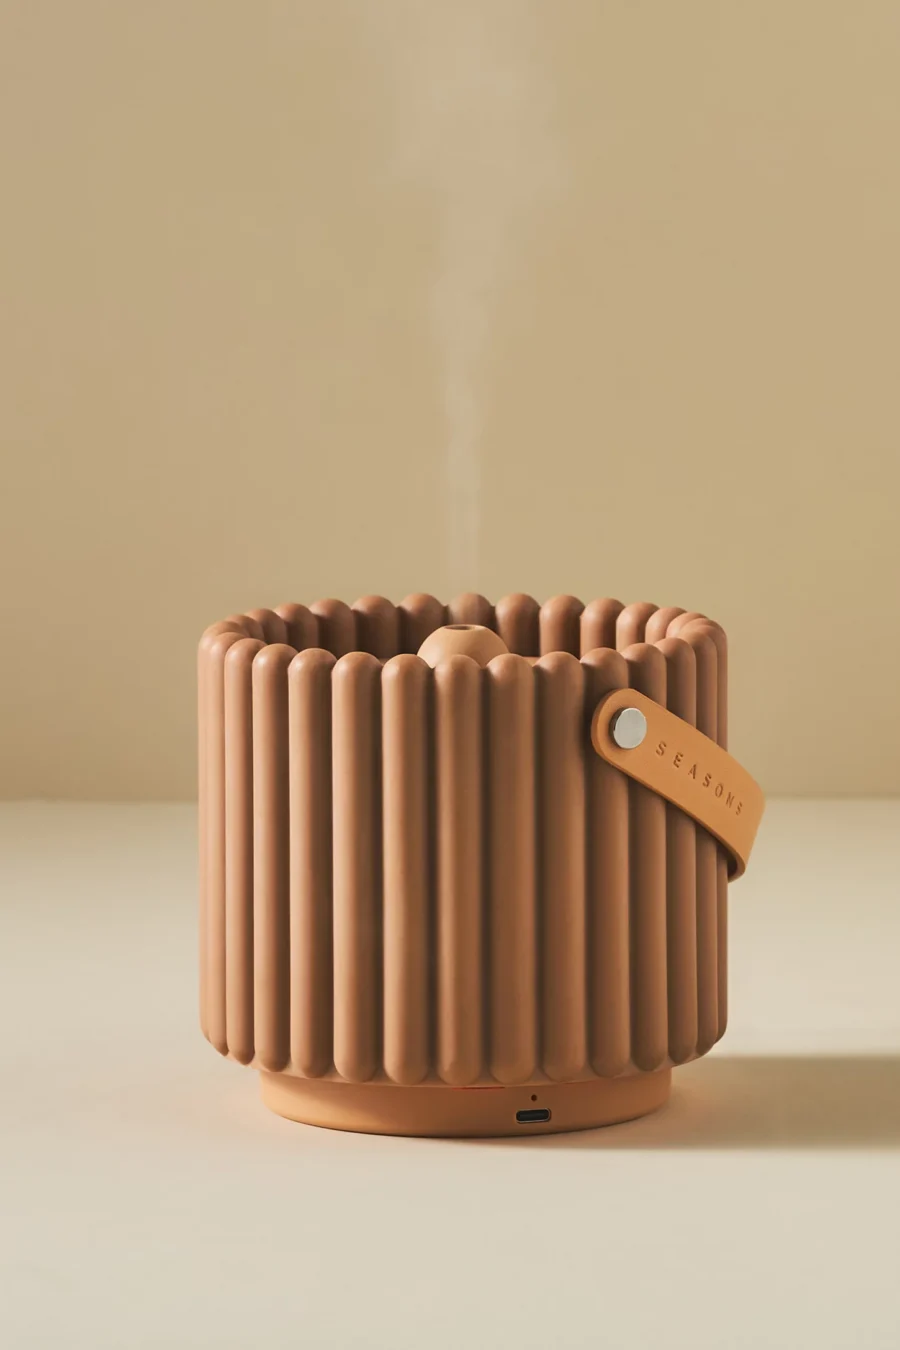 A ribbed, cylindrical humidifier emitting steam, with a leather strap labeled "Seasons" and a USB-C port at the base, placed on a beige surface.